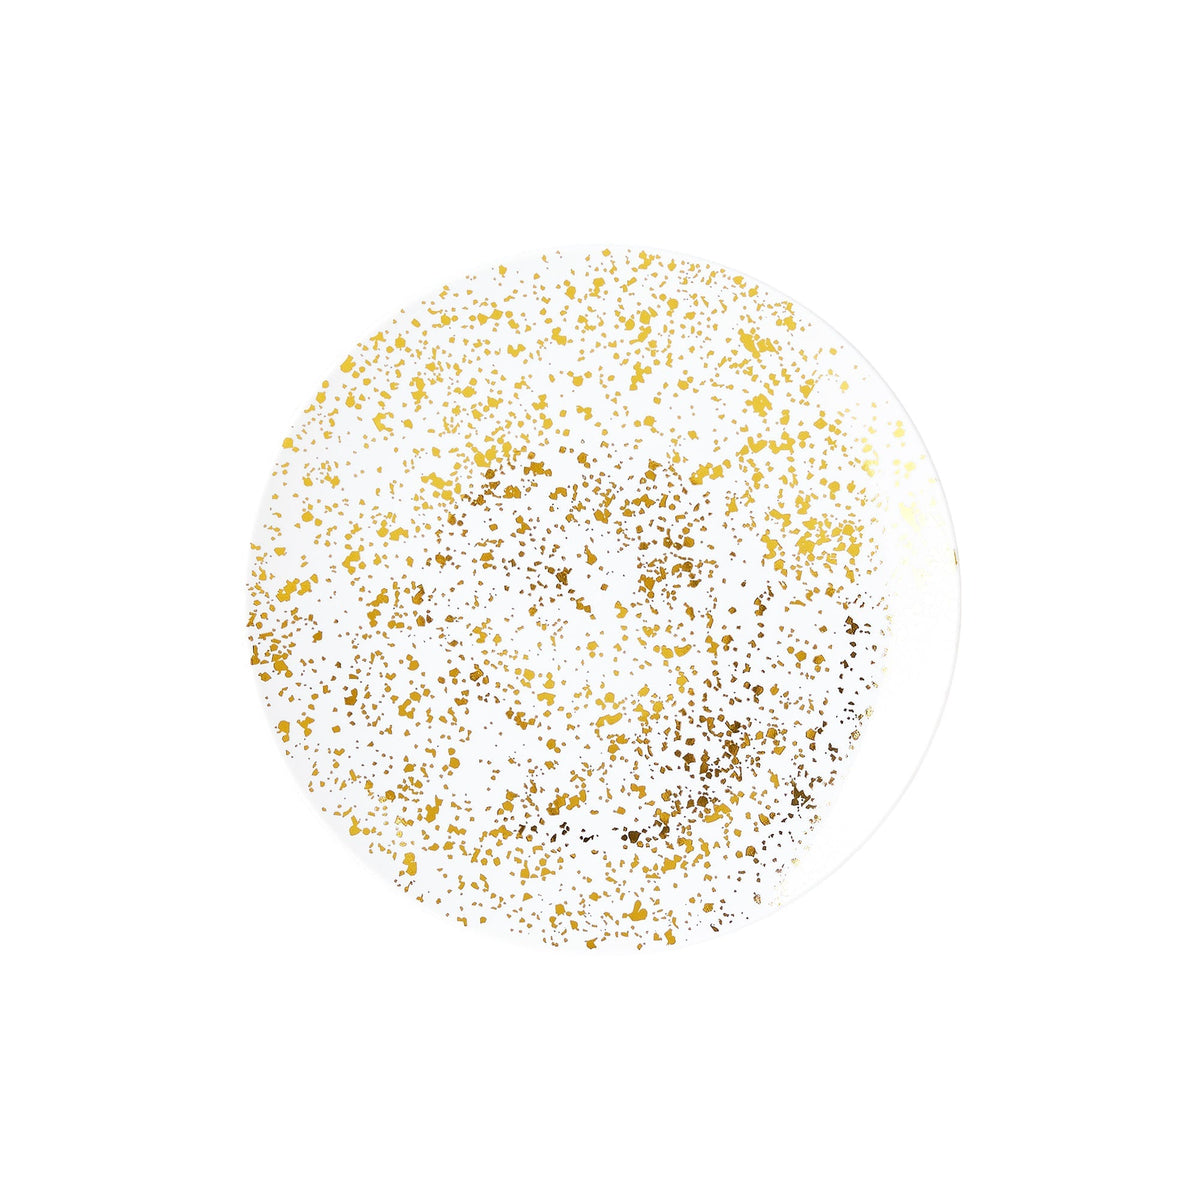 MADISON IMPORTS Disposable-Plasticware White Premium Quality Small Round Dessert Plates with Gold Dots, 7.5 Inches, 10 Count 775310992016